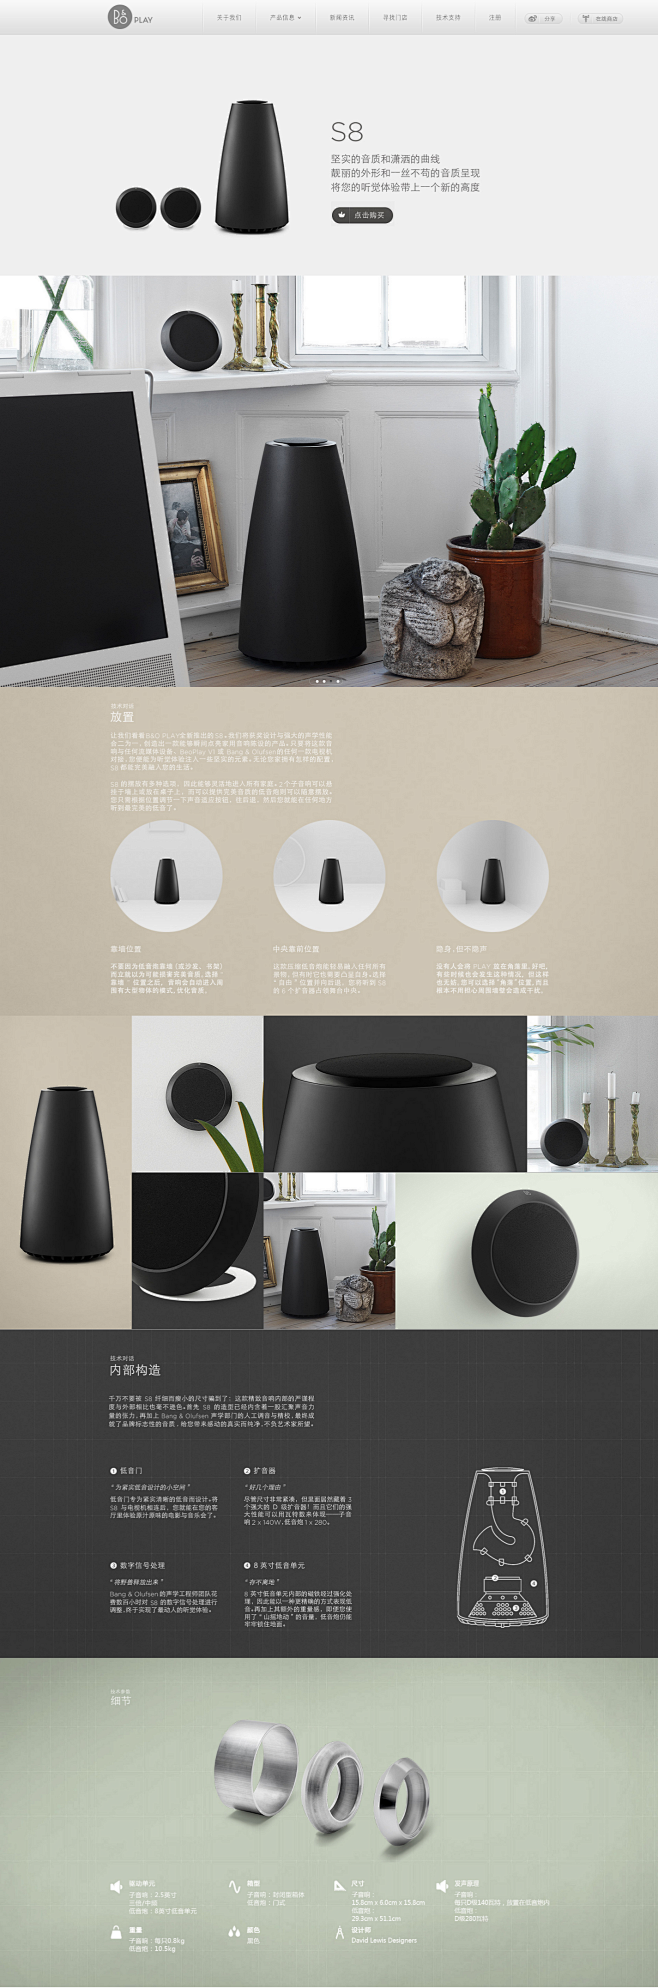 BeoPlay S8